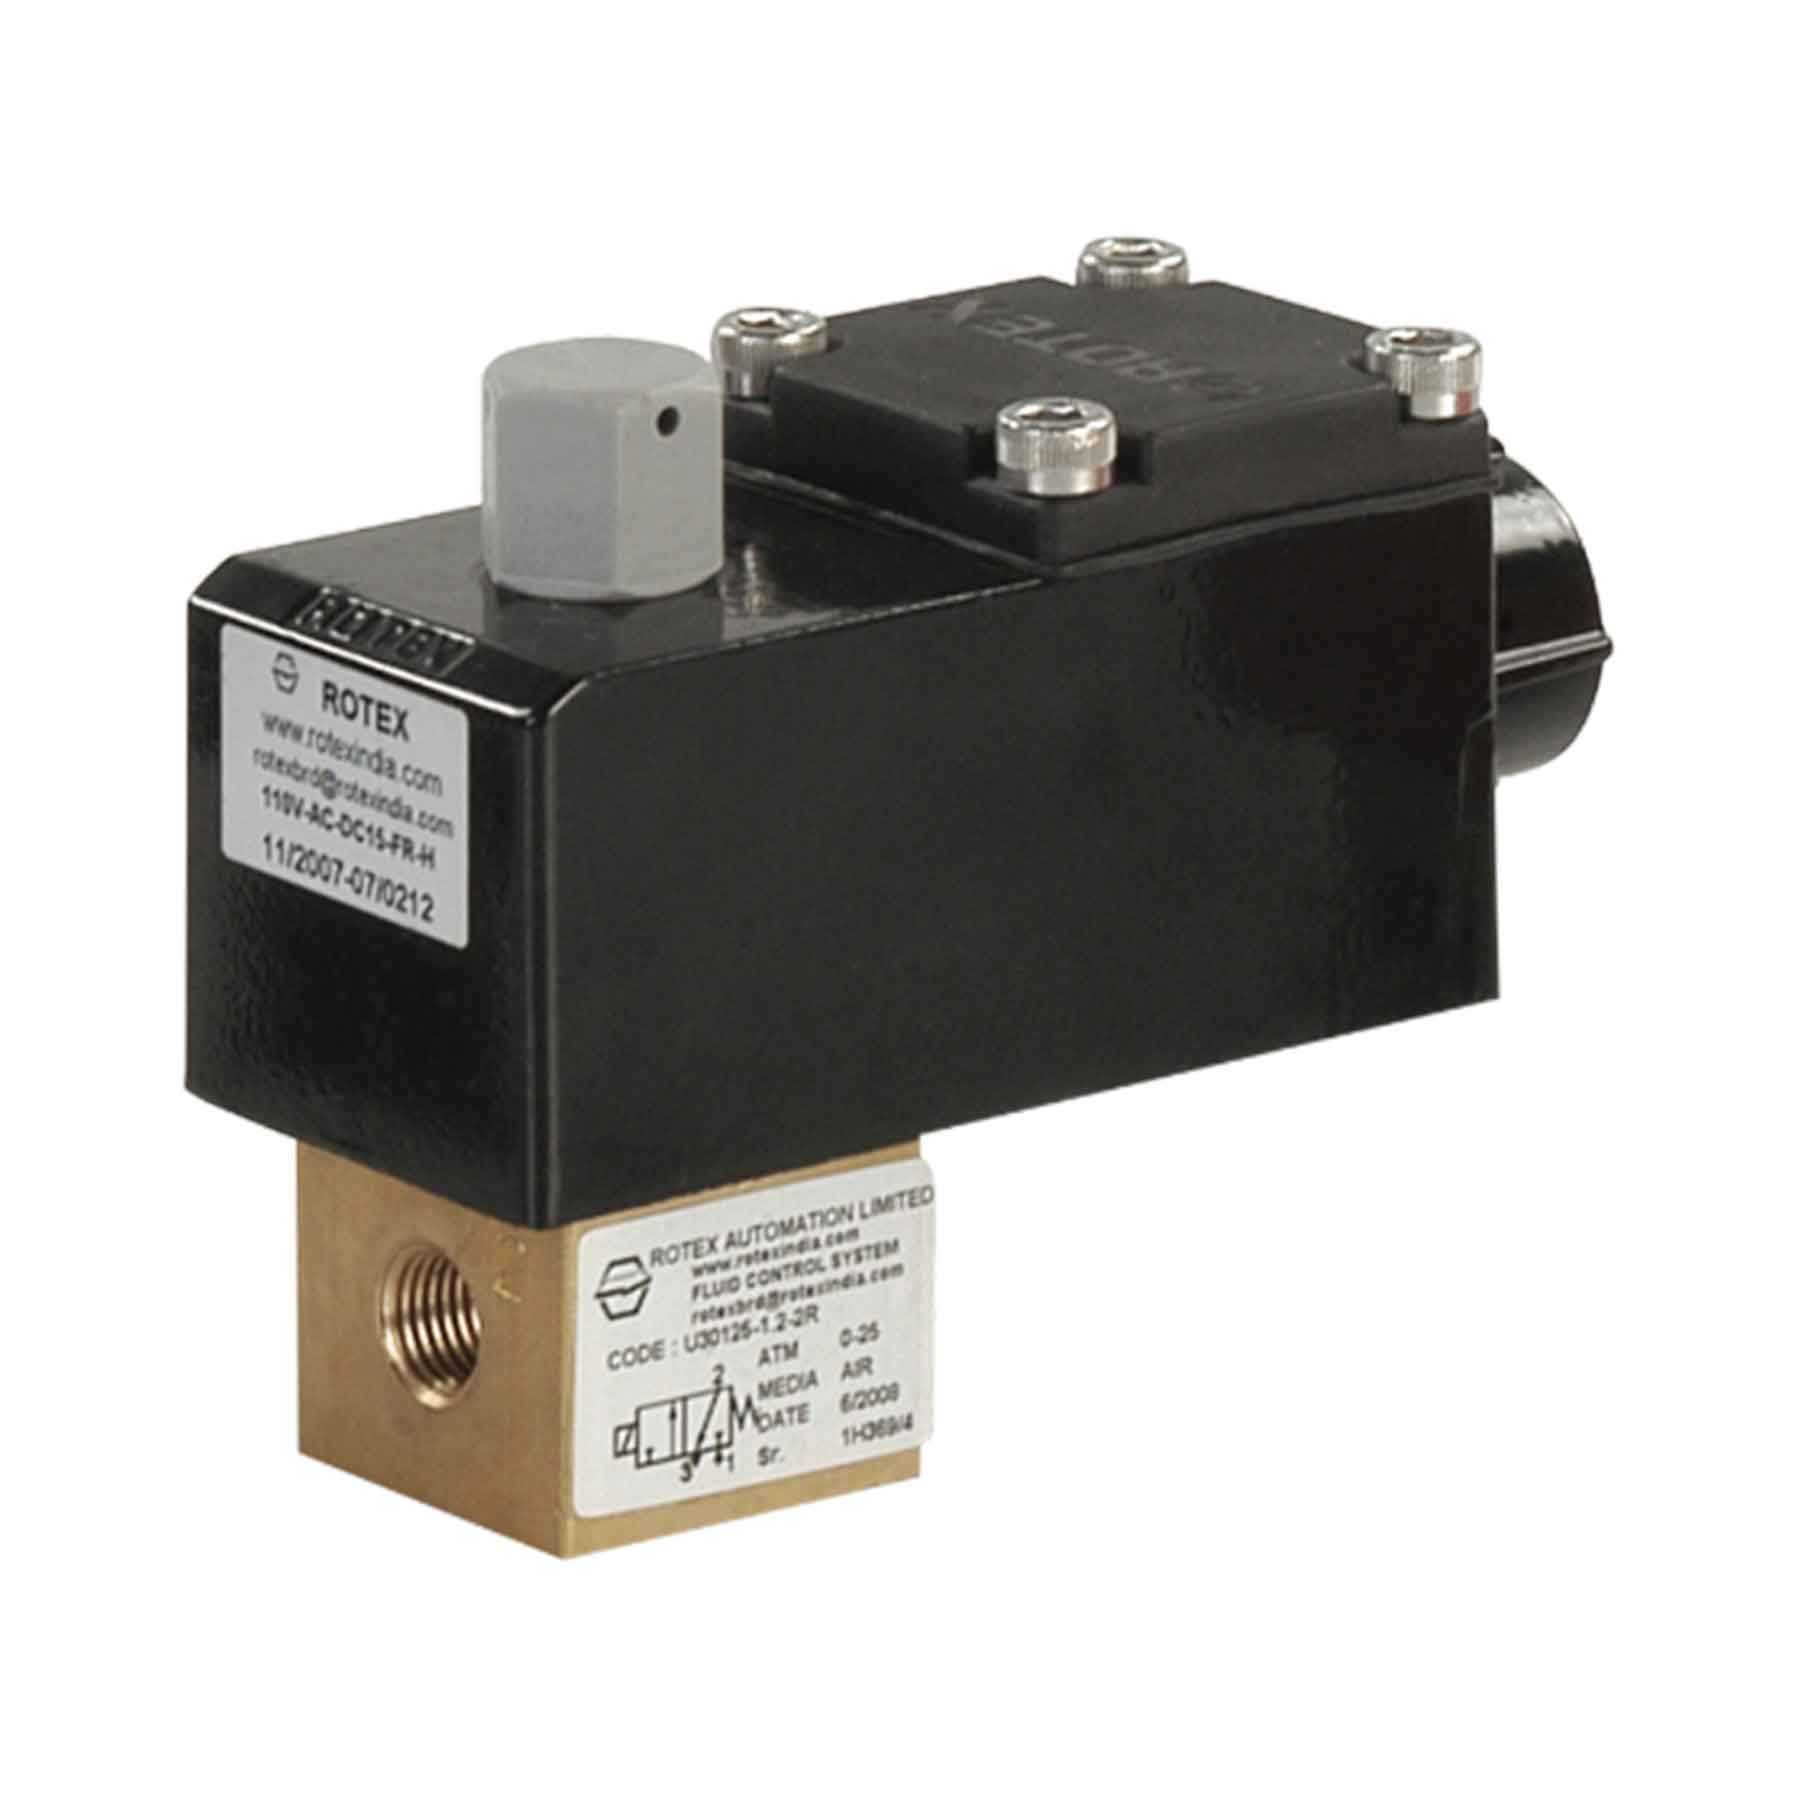 Rotex 2/2-Way Normally Closed Direct Lift Solenoid Valve 20101-4-2G-B5-S2+III-24V-DC-66-NS-H-01